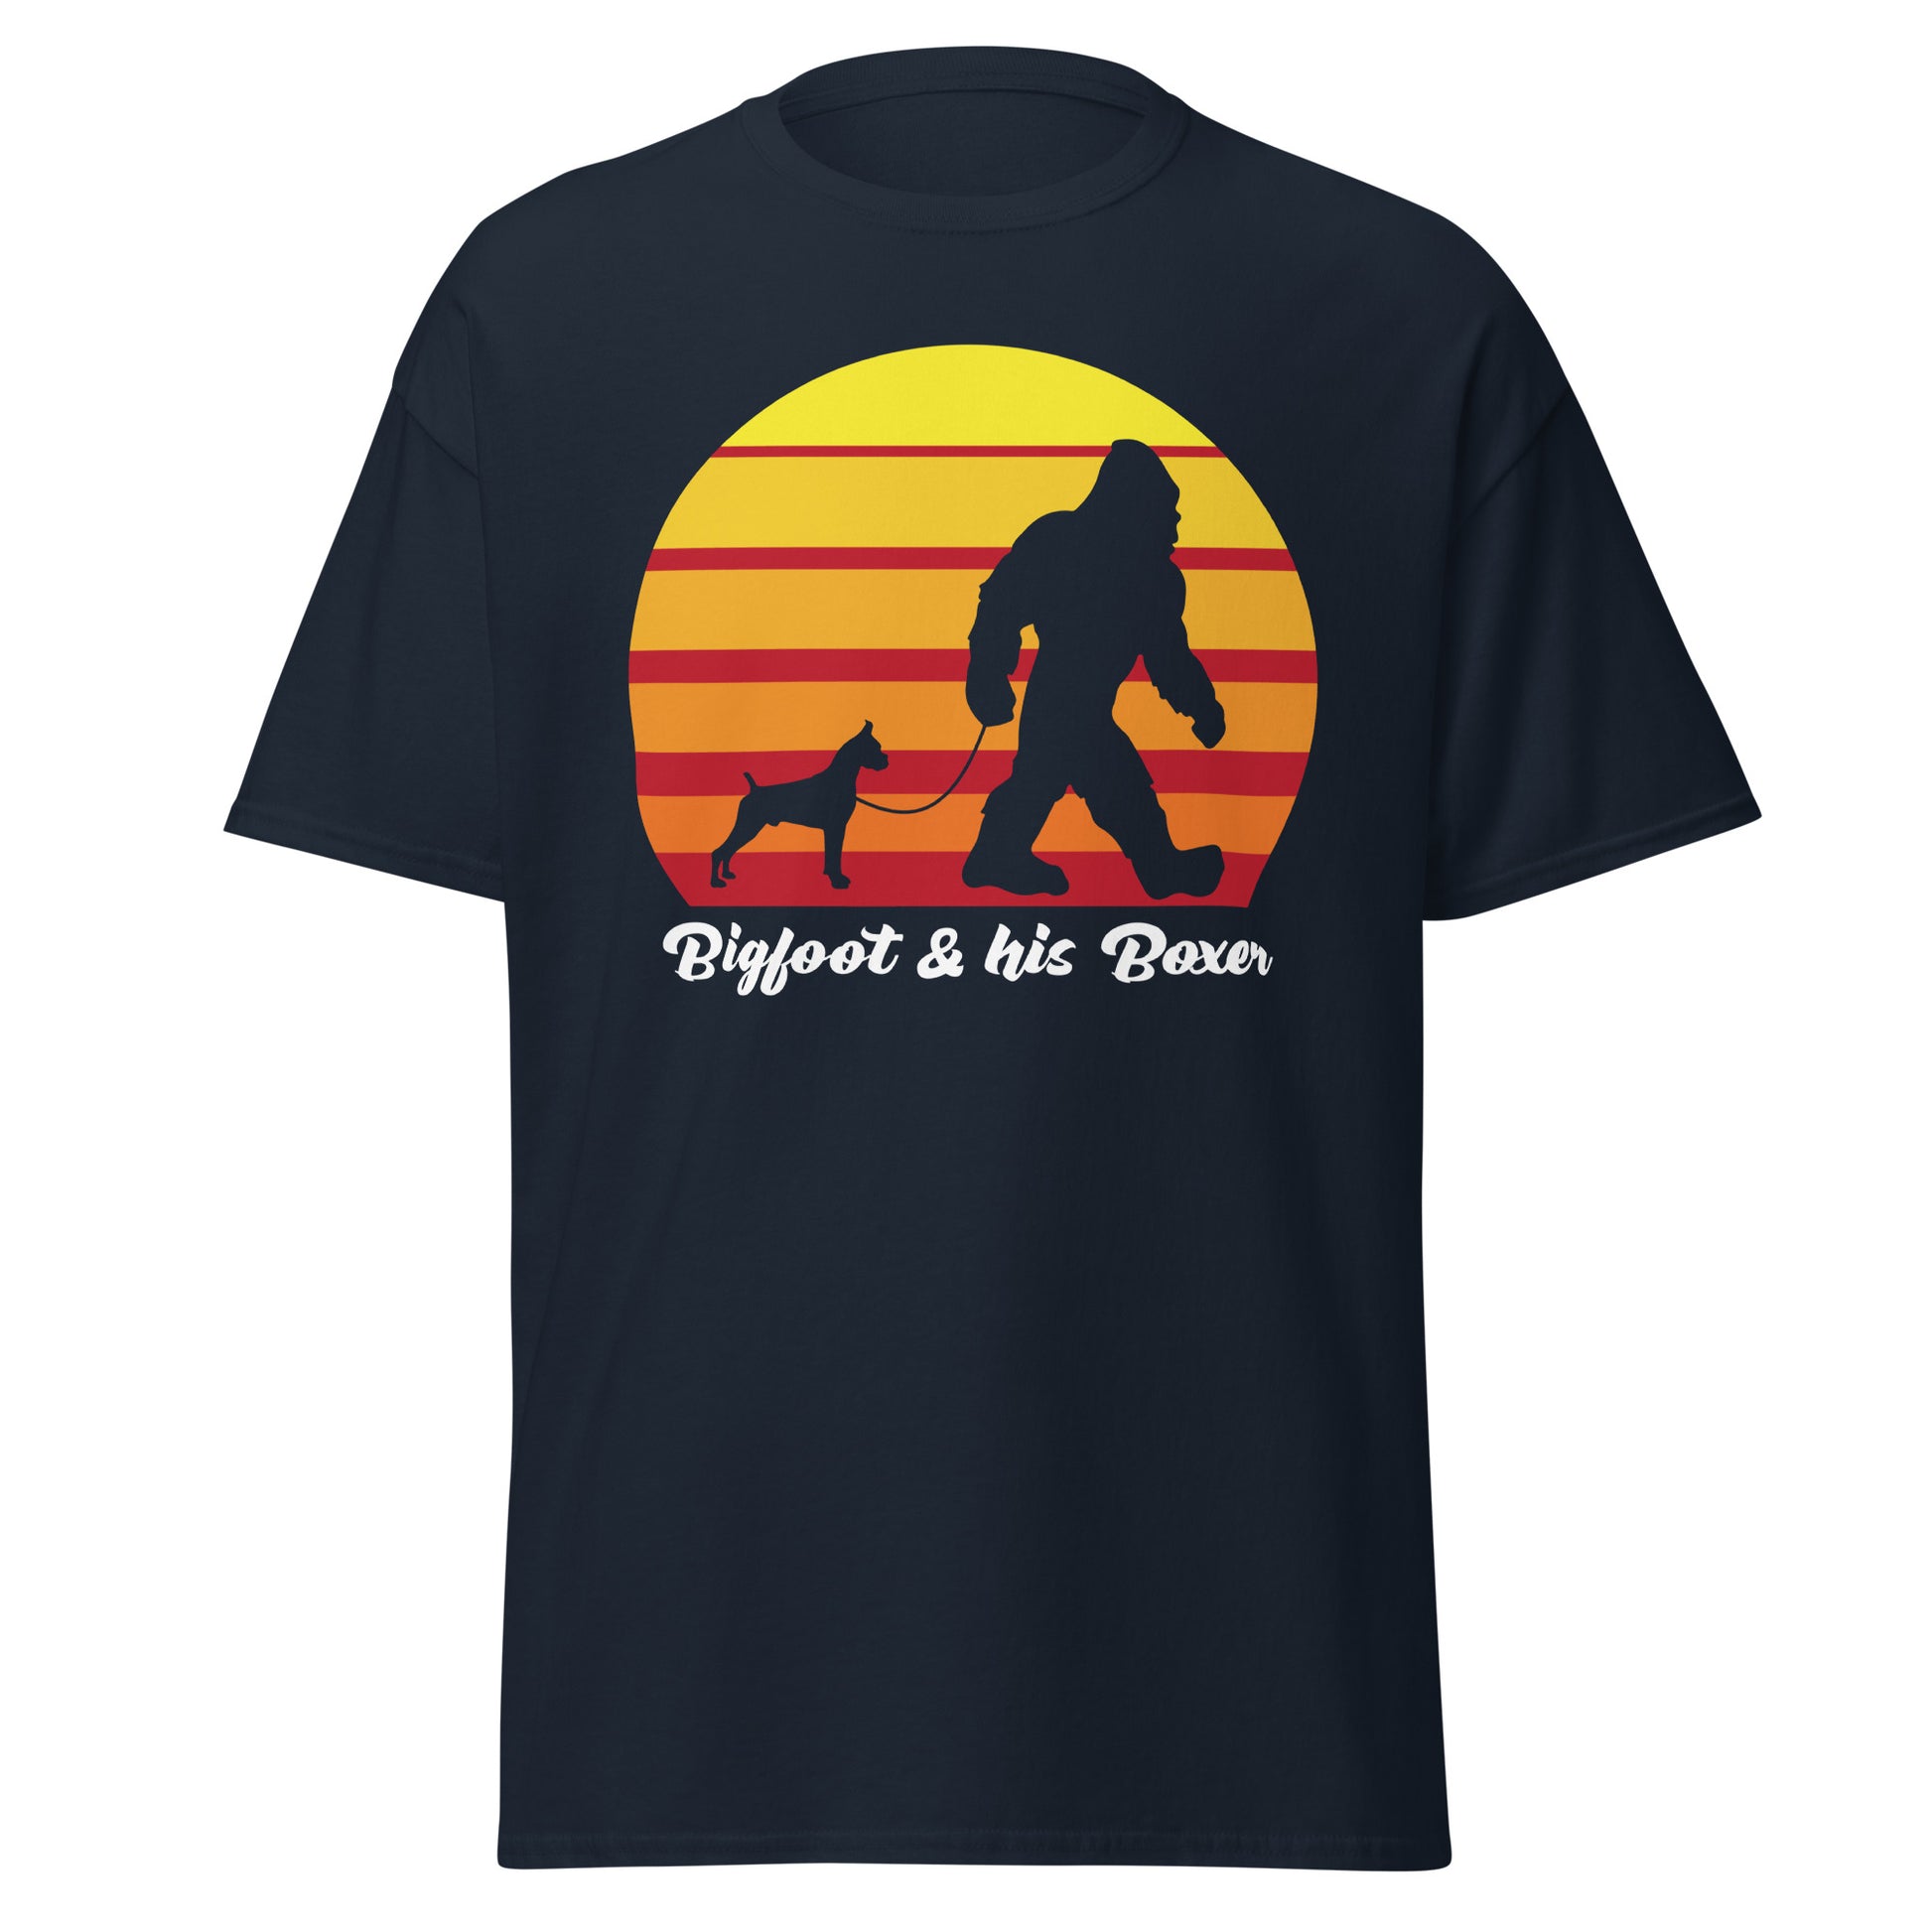 Big foot and his Boxer men’s navy t-shirt by Dog Artistry.